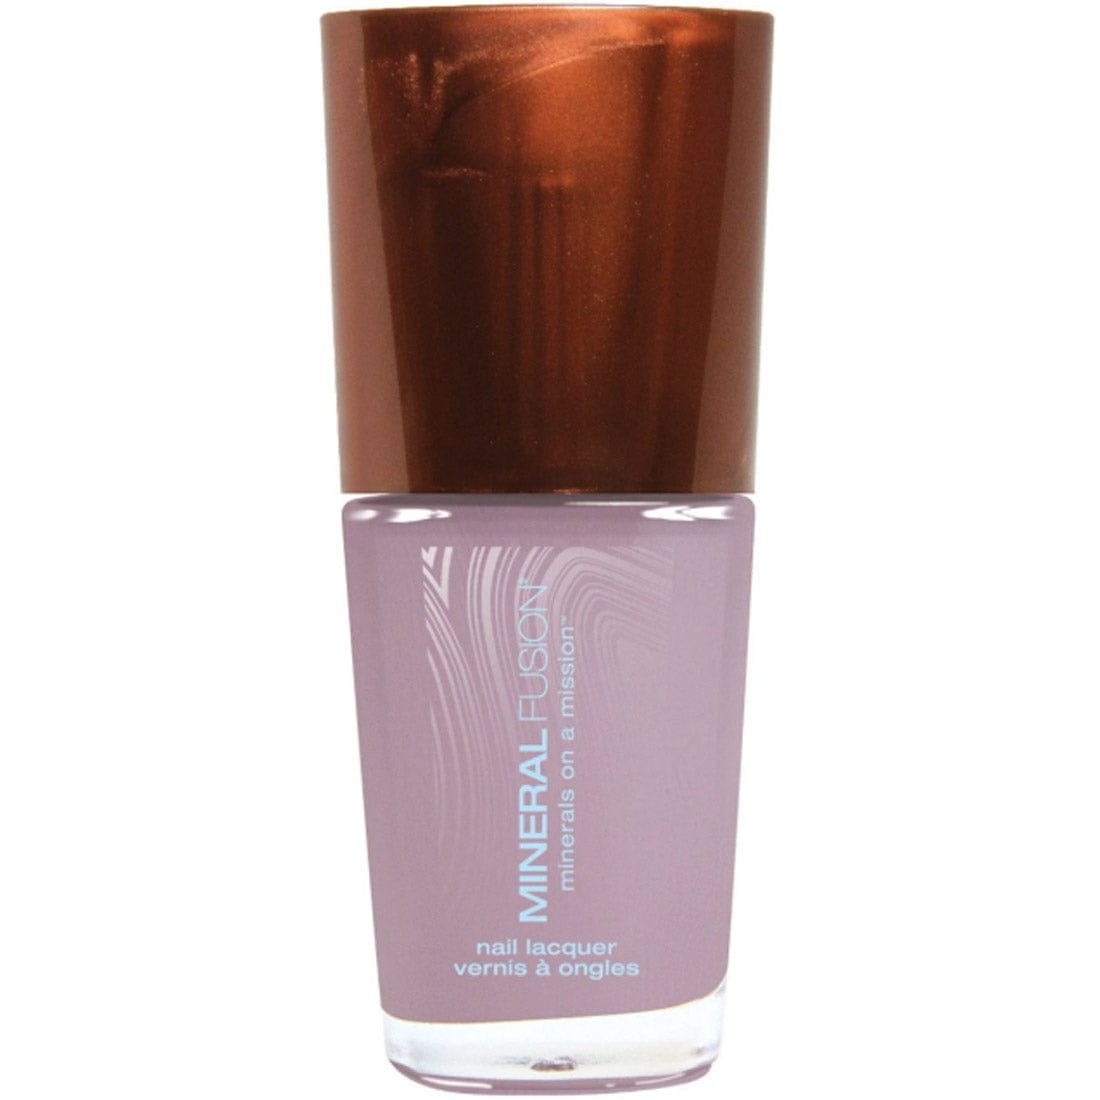 Mineral Fusion Nail Polish Bubble, 10mL, Clearance 35% Off, Final Sale